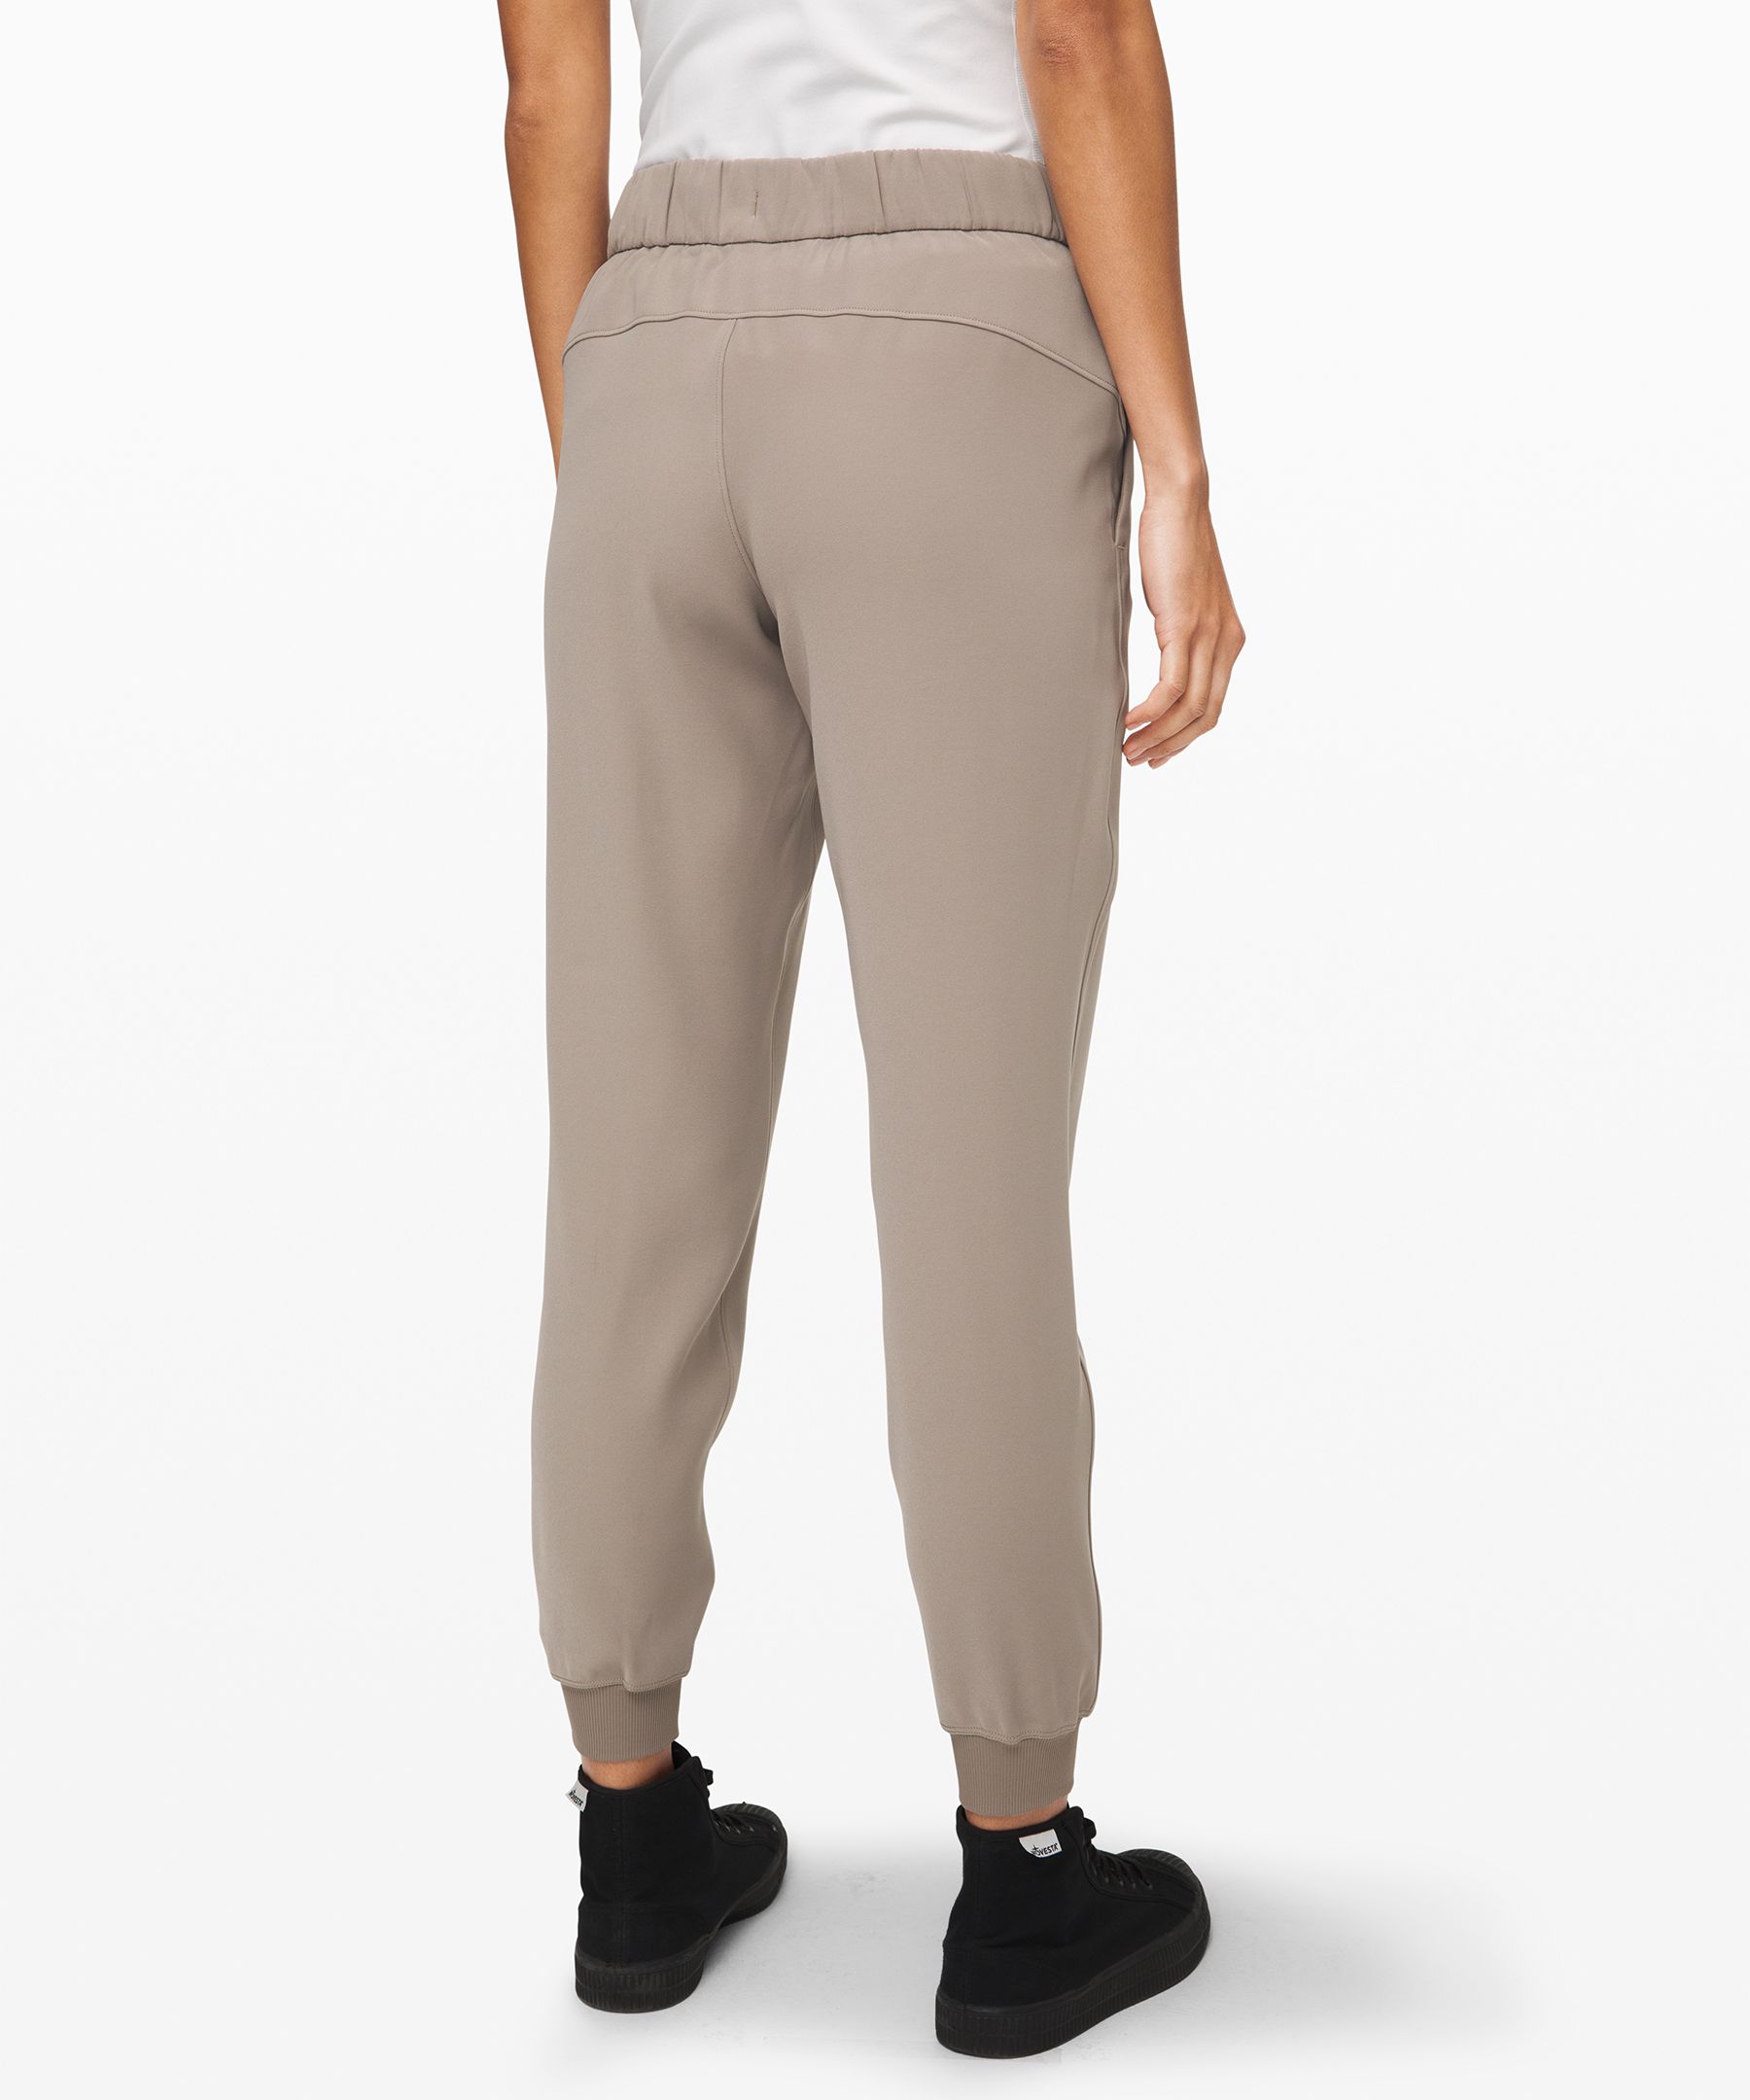 Lulu On The Fly Jogger Woven Wire International Society Of, 53% OFF